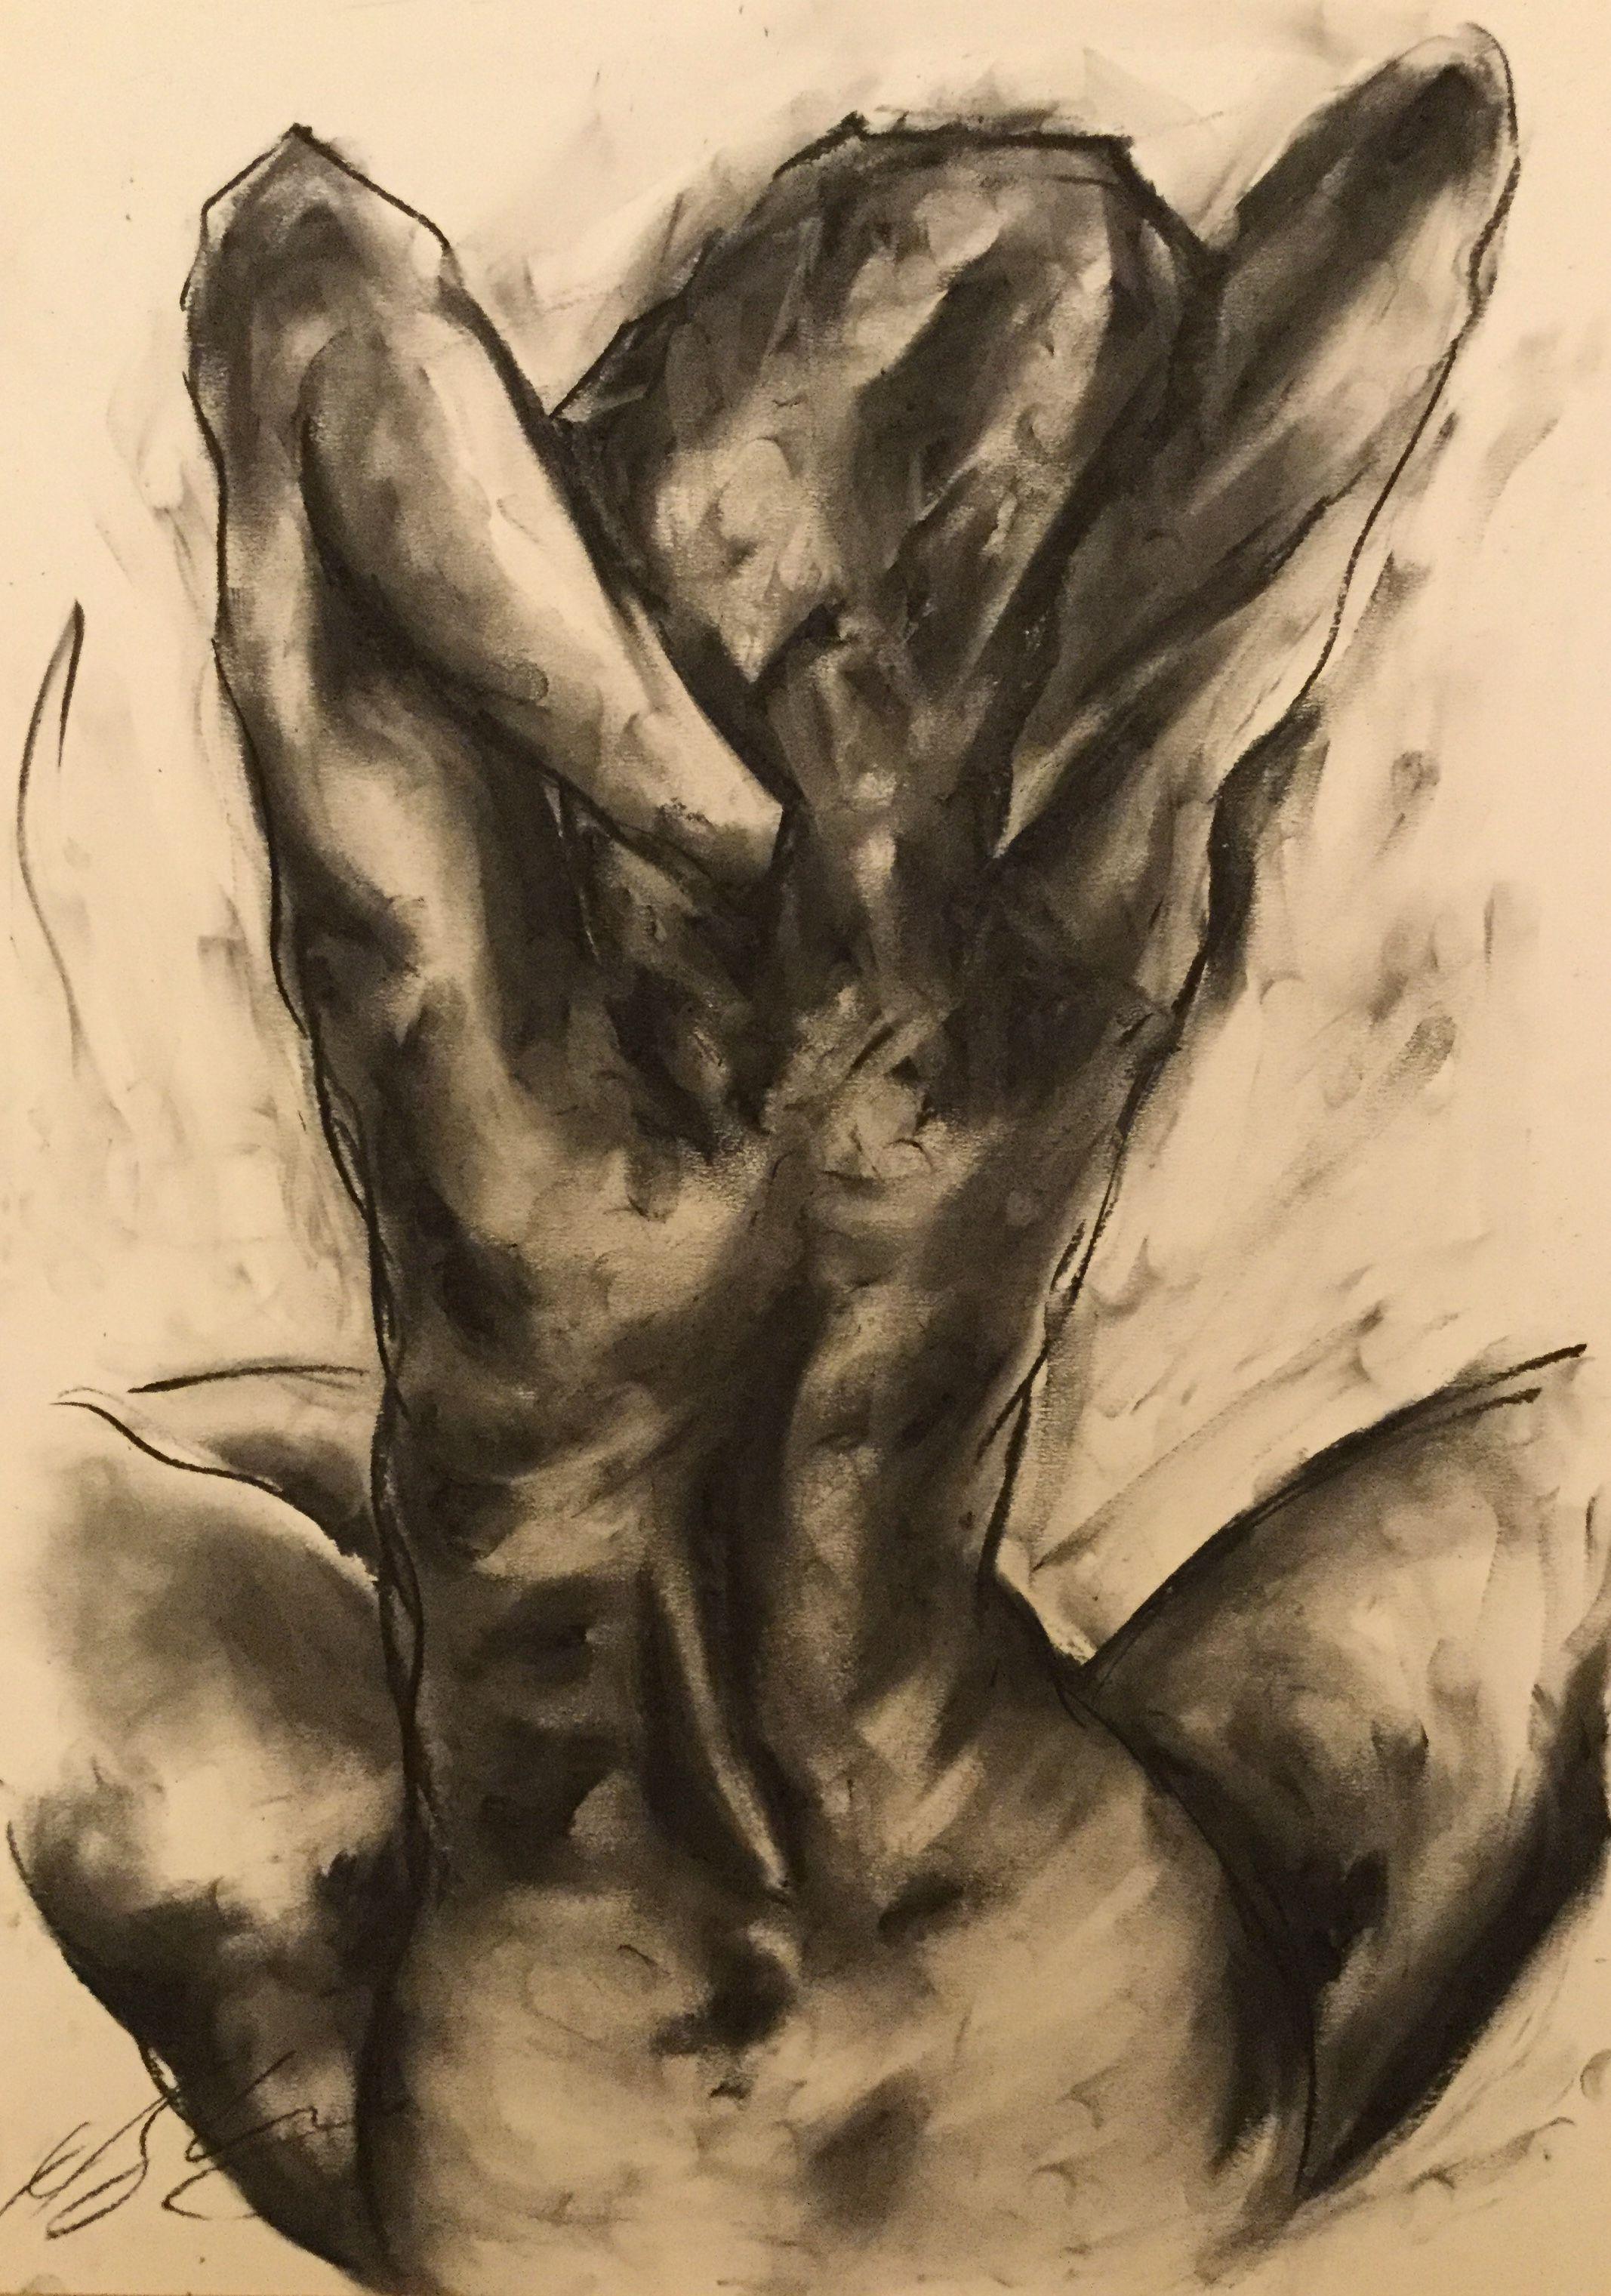 More, Drawing, Charcoal on Paper - Art by James Shipton